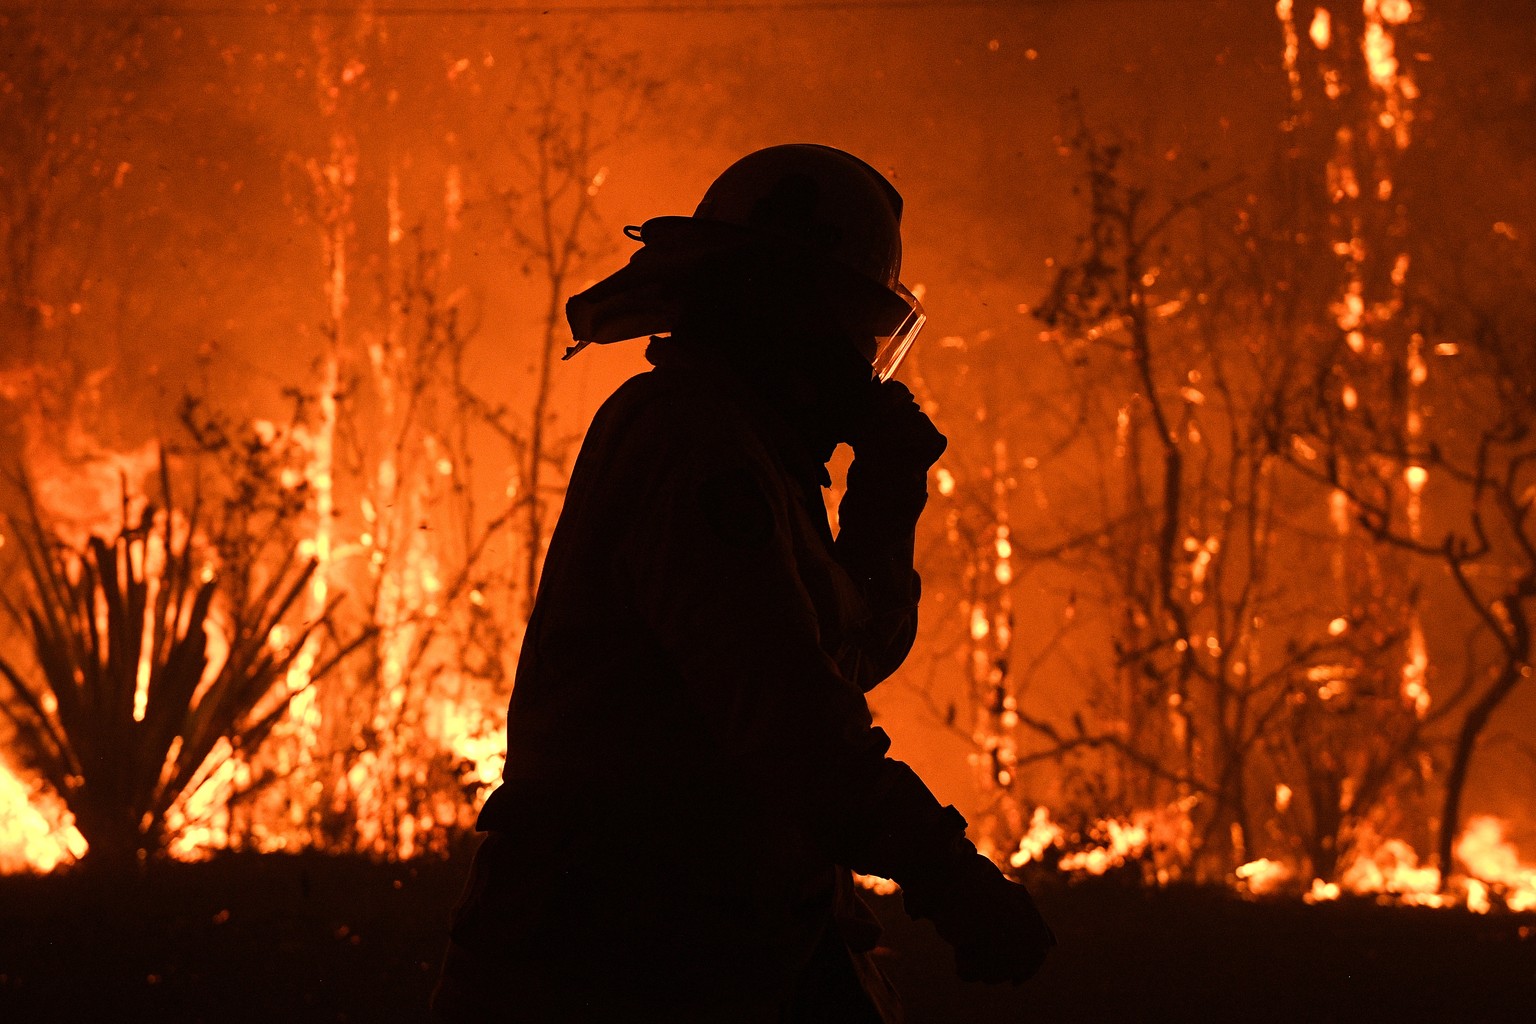 NSW Rural Fire Service crews protect properties on Waratah Road and Kelyknack Road as the Three Mile fire approaches Mangrove Mountain, Australia, December 5, 2019. Picture taken December 5, 2019. AAP ...